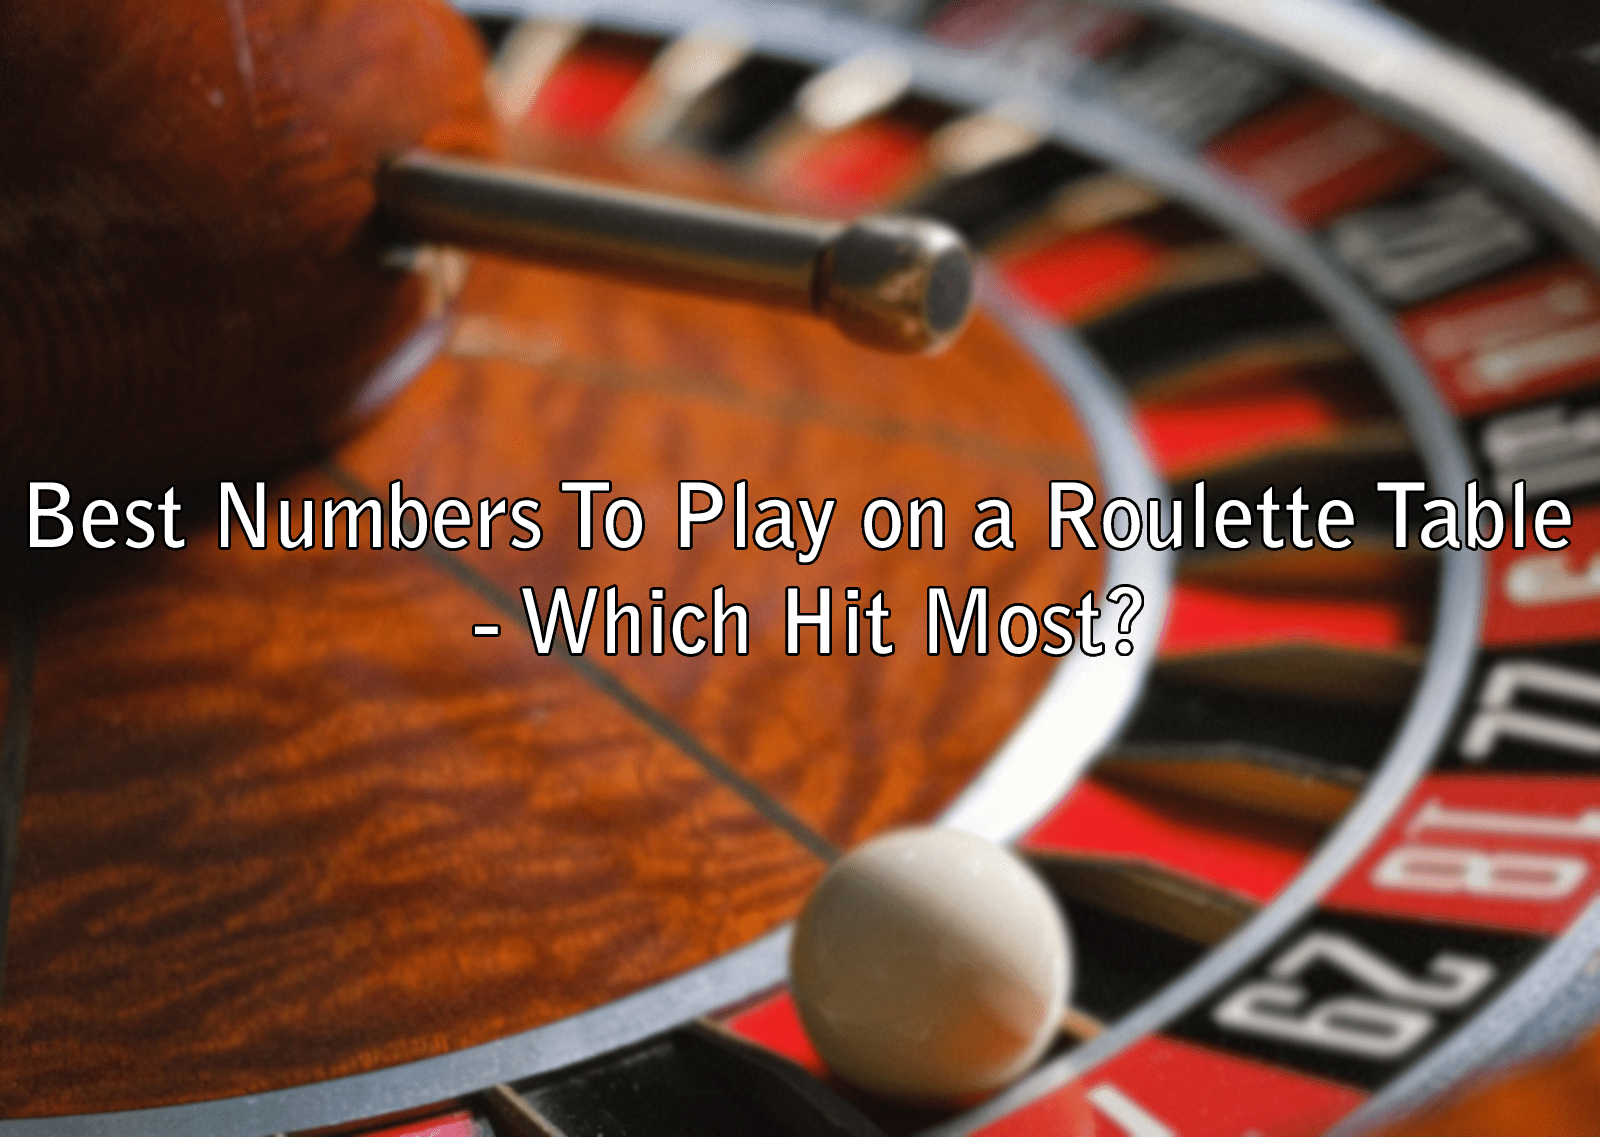 Best Numbers To Play on a Roulette Table - Which Hit Most?